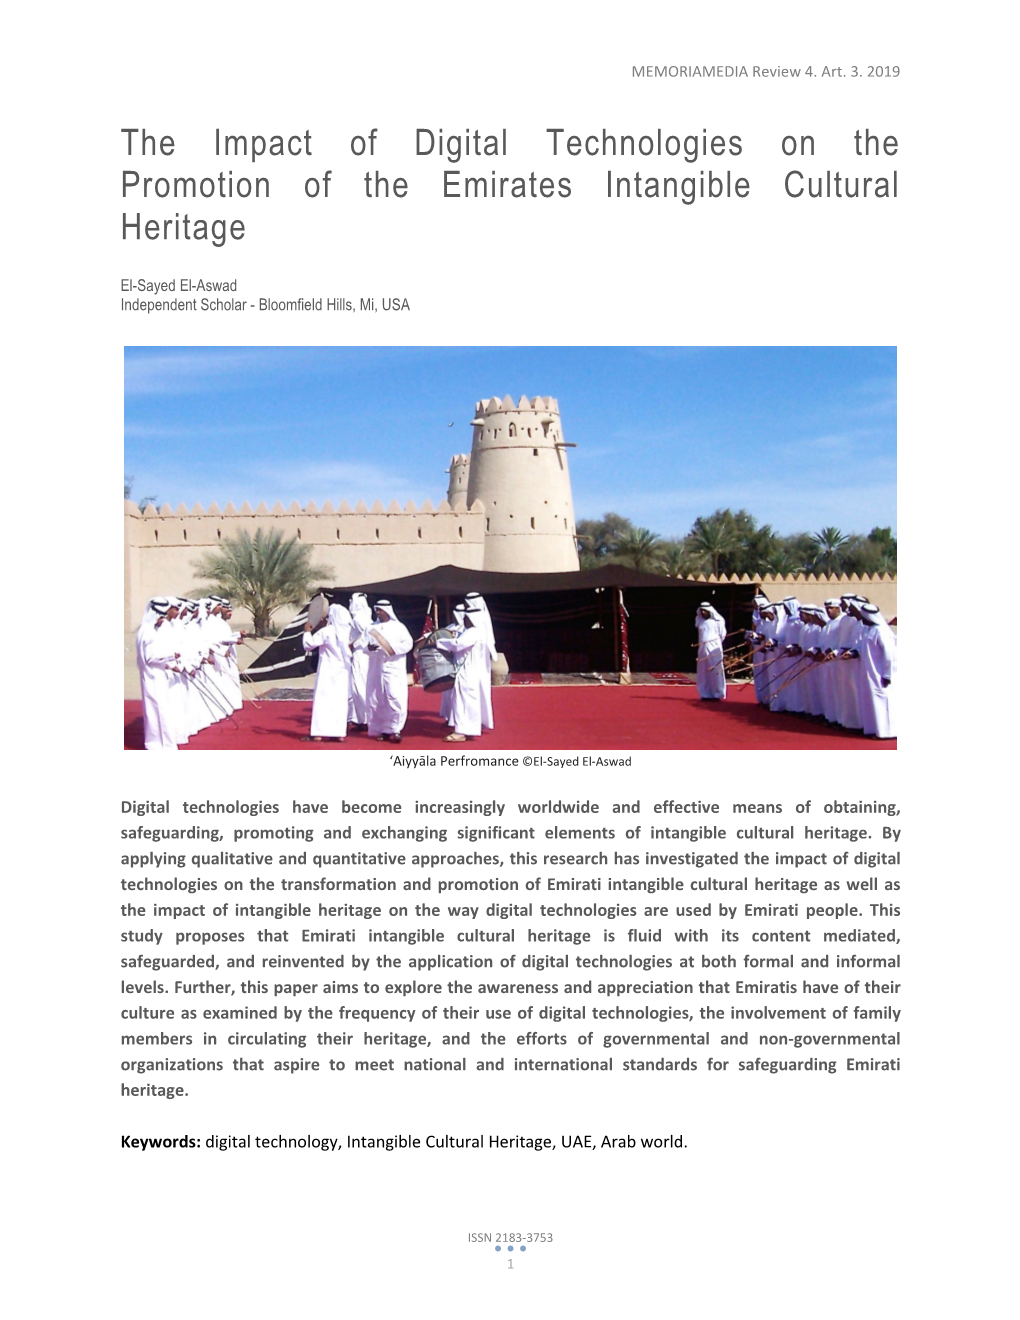 The Impact of Digital Technologies on the Promotion of the Emirates Intangible Cultural